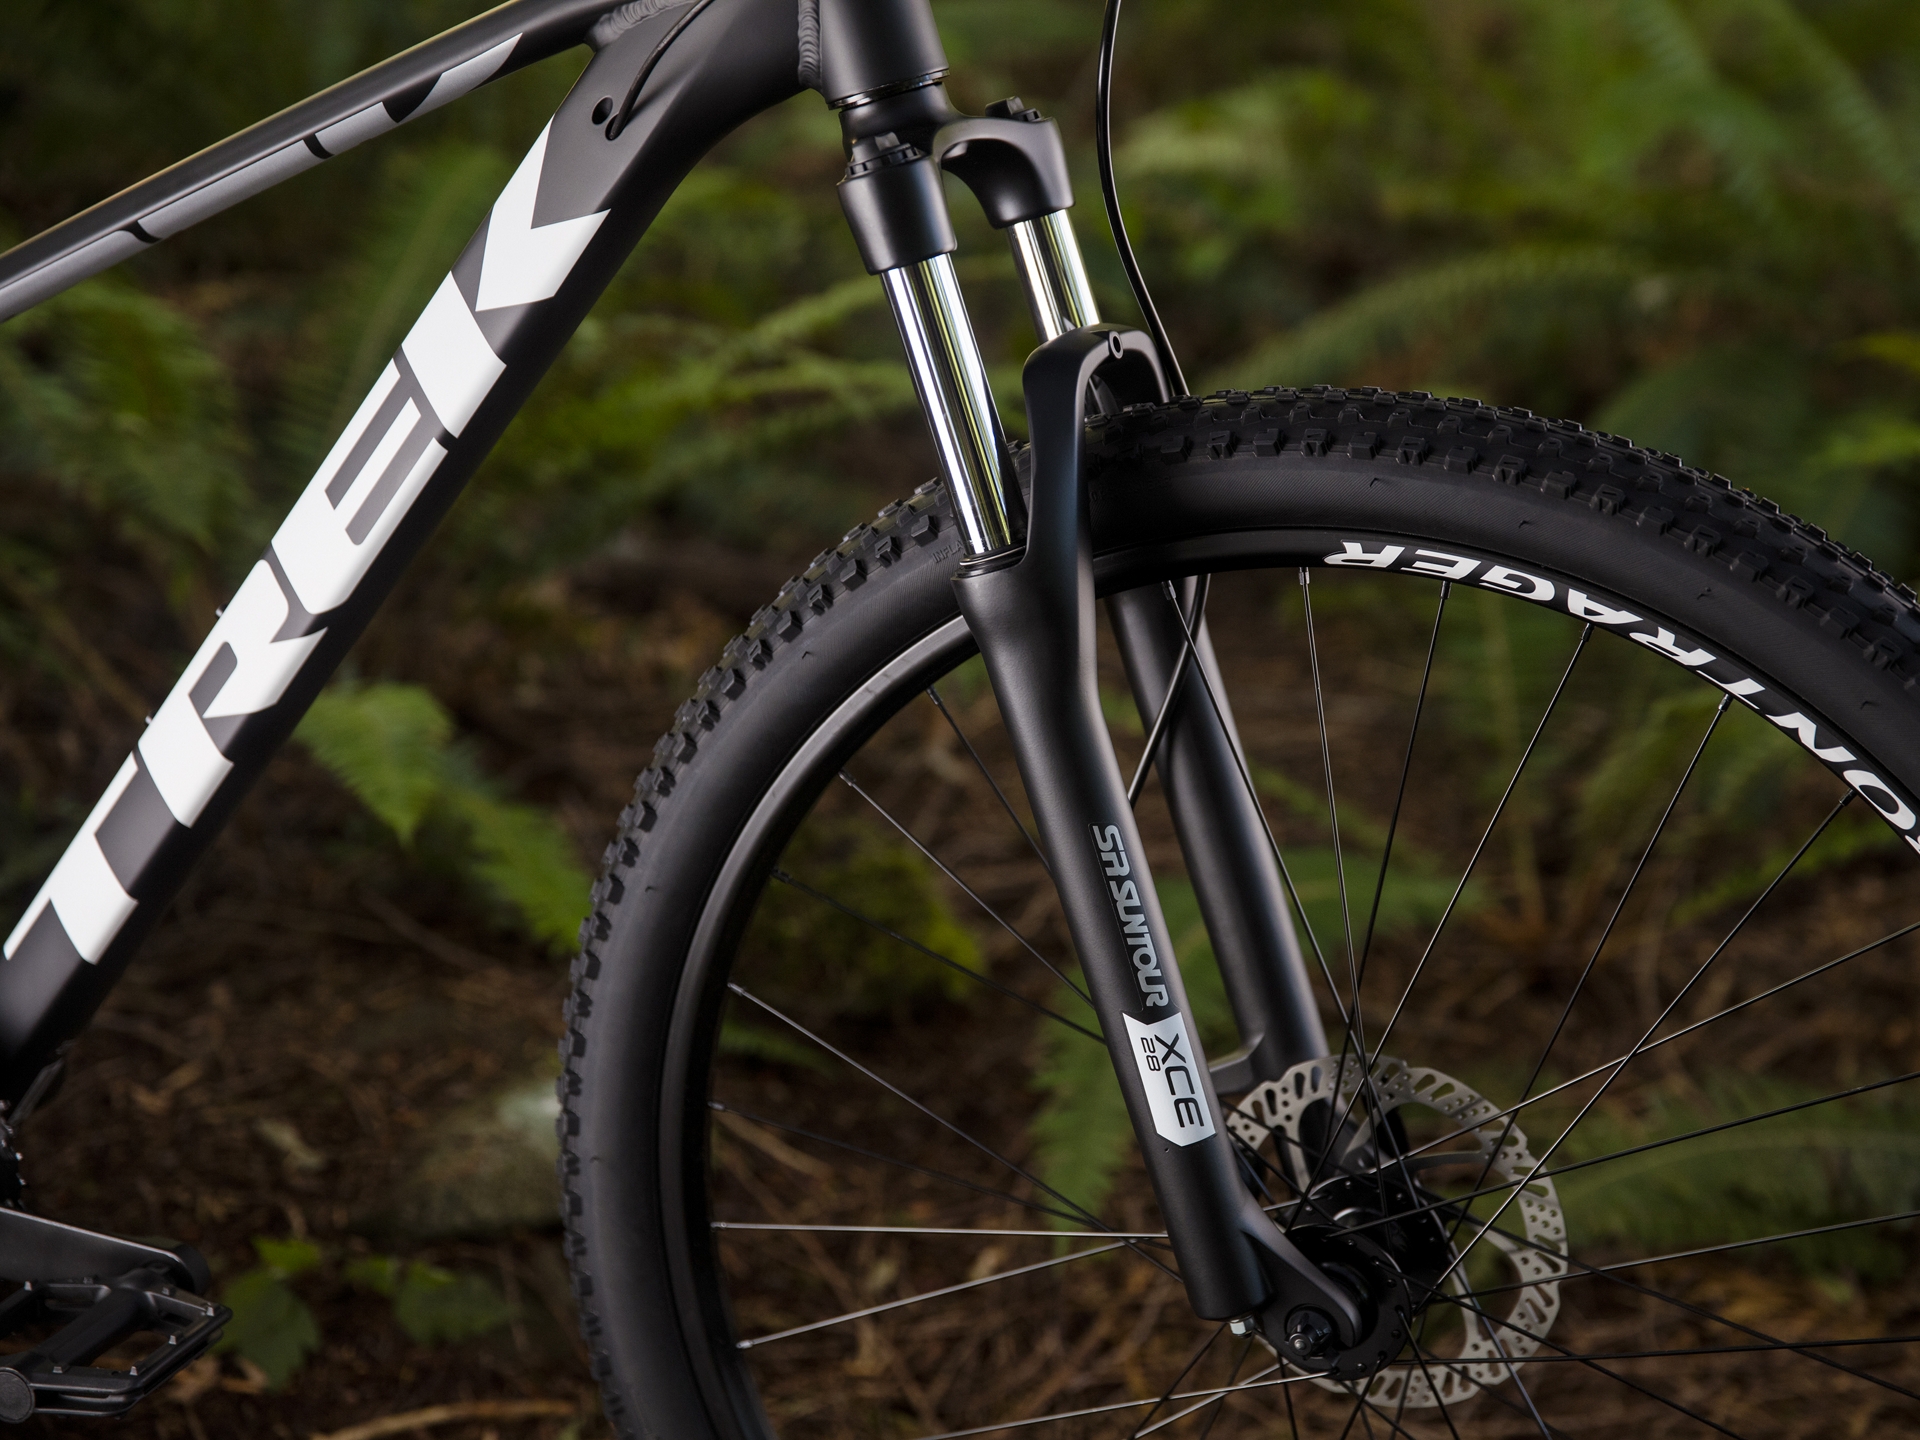 Review of Trek Marlin 5 Should You Buy One?